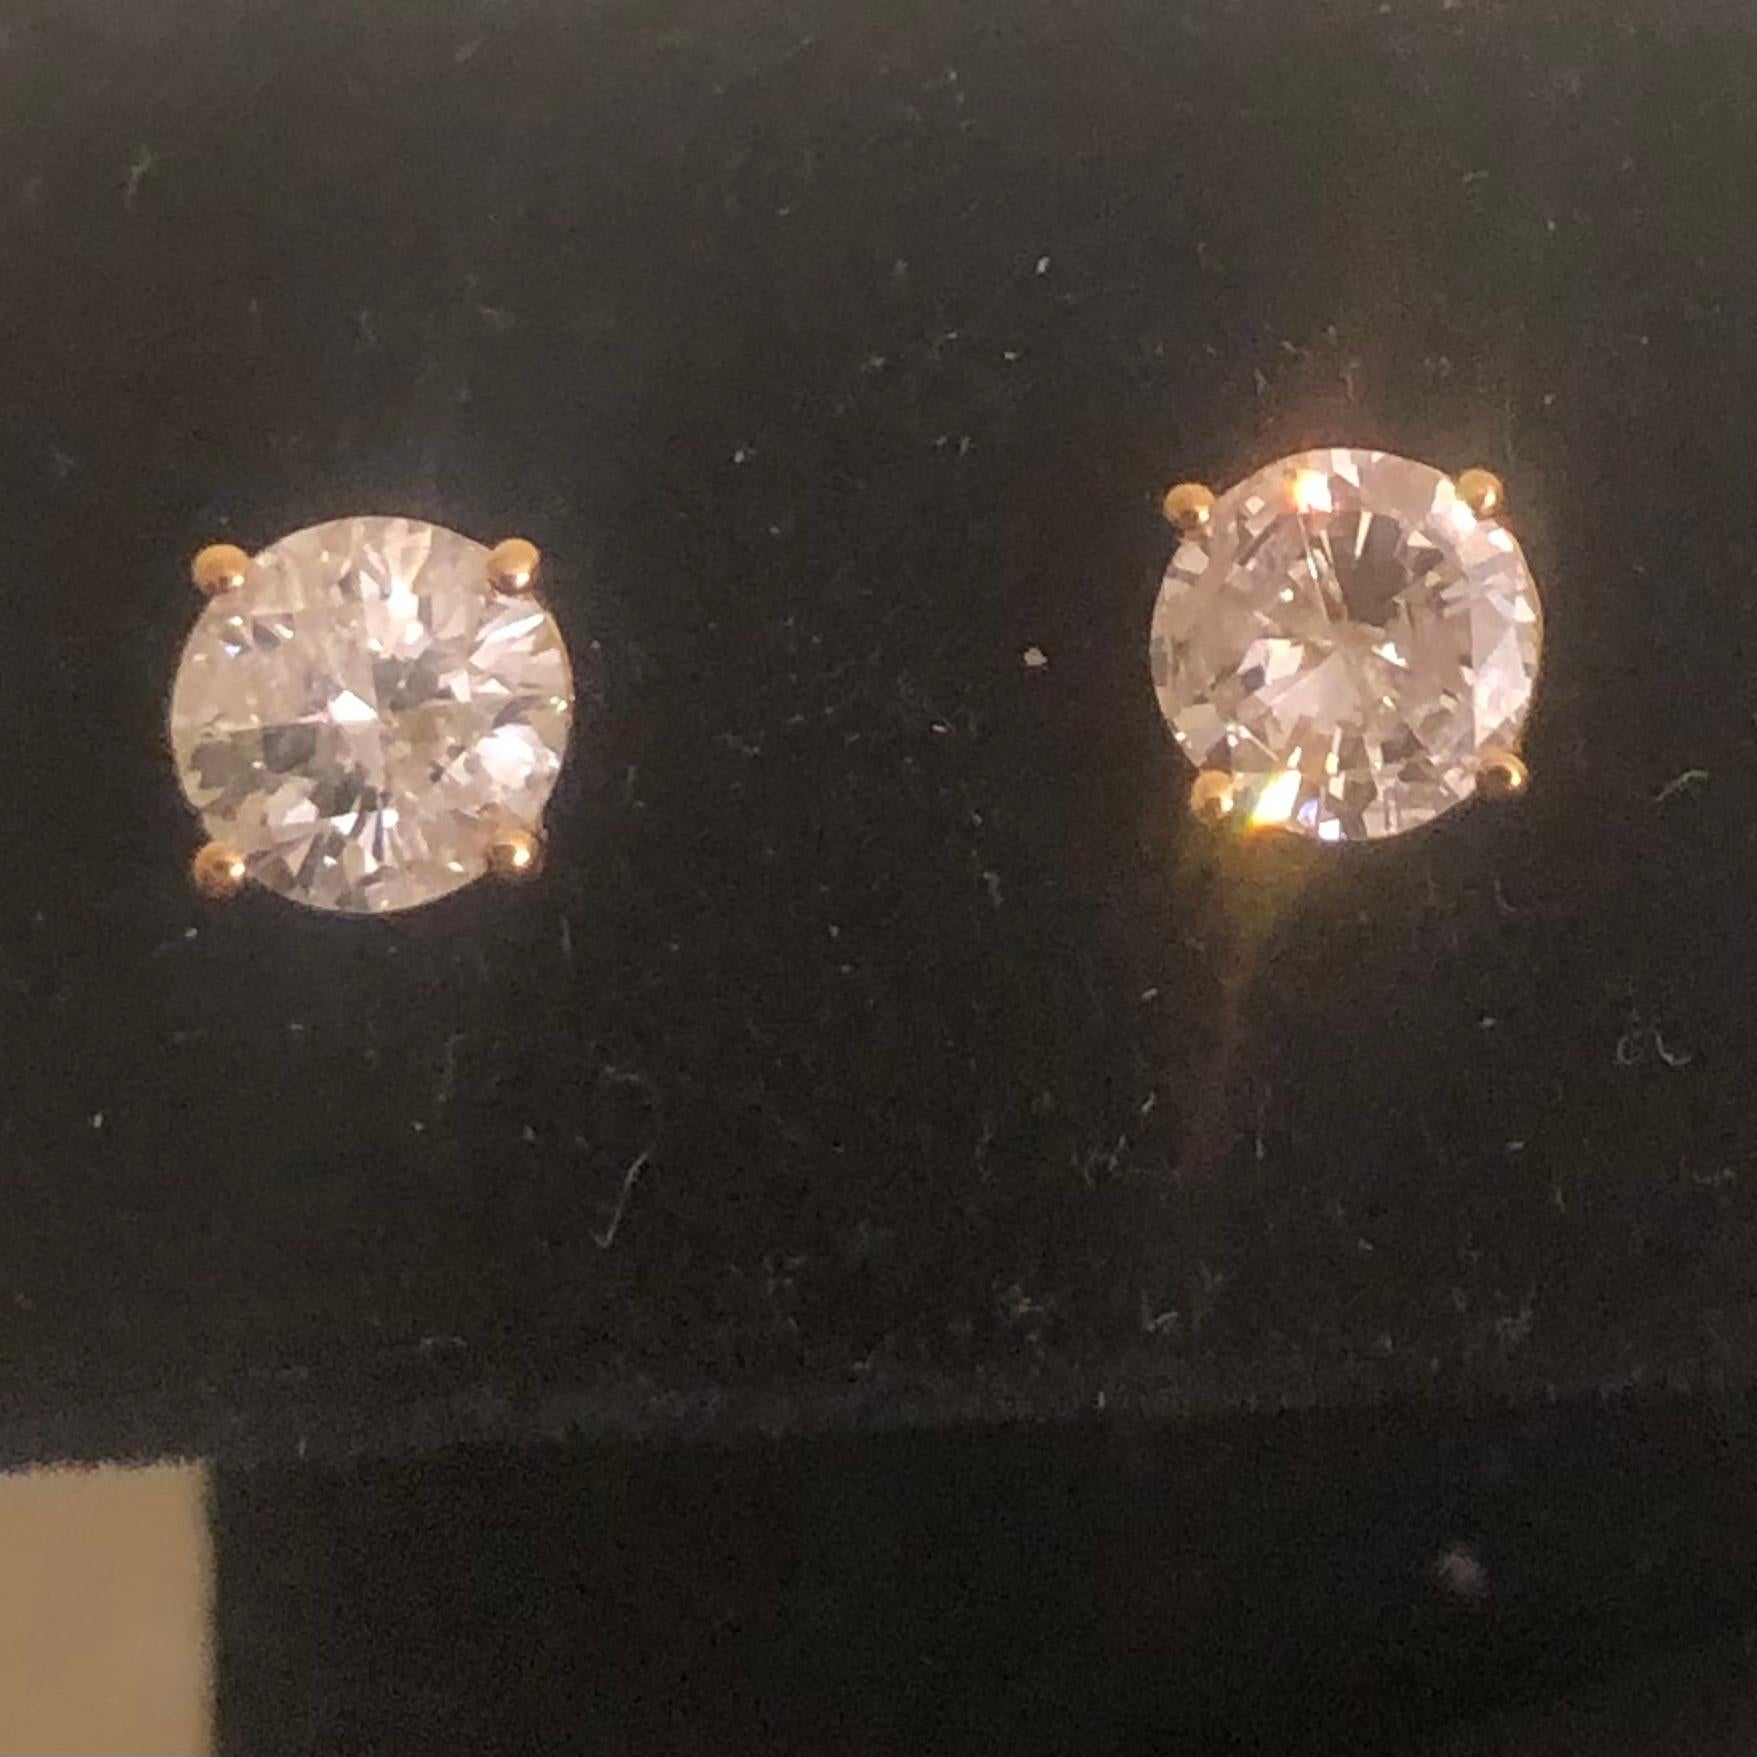 Stunning 1 1/2 Ct Round Solitaire Diamond Stud Earrings in 14K Yellow Gold. These natural diamond solitaire studs are certified with an appraisal report value of $4,470.00.

A large center solitaire diamond (size of an engagement ring) is set on